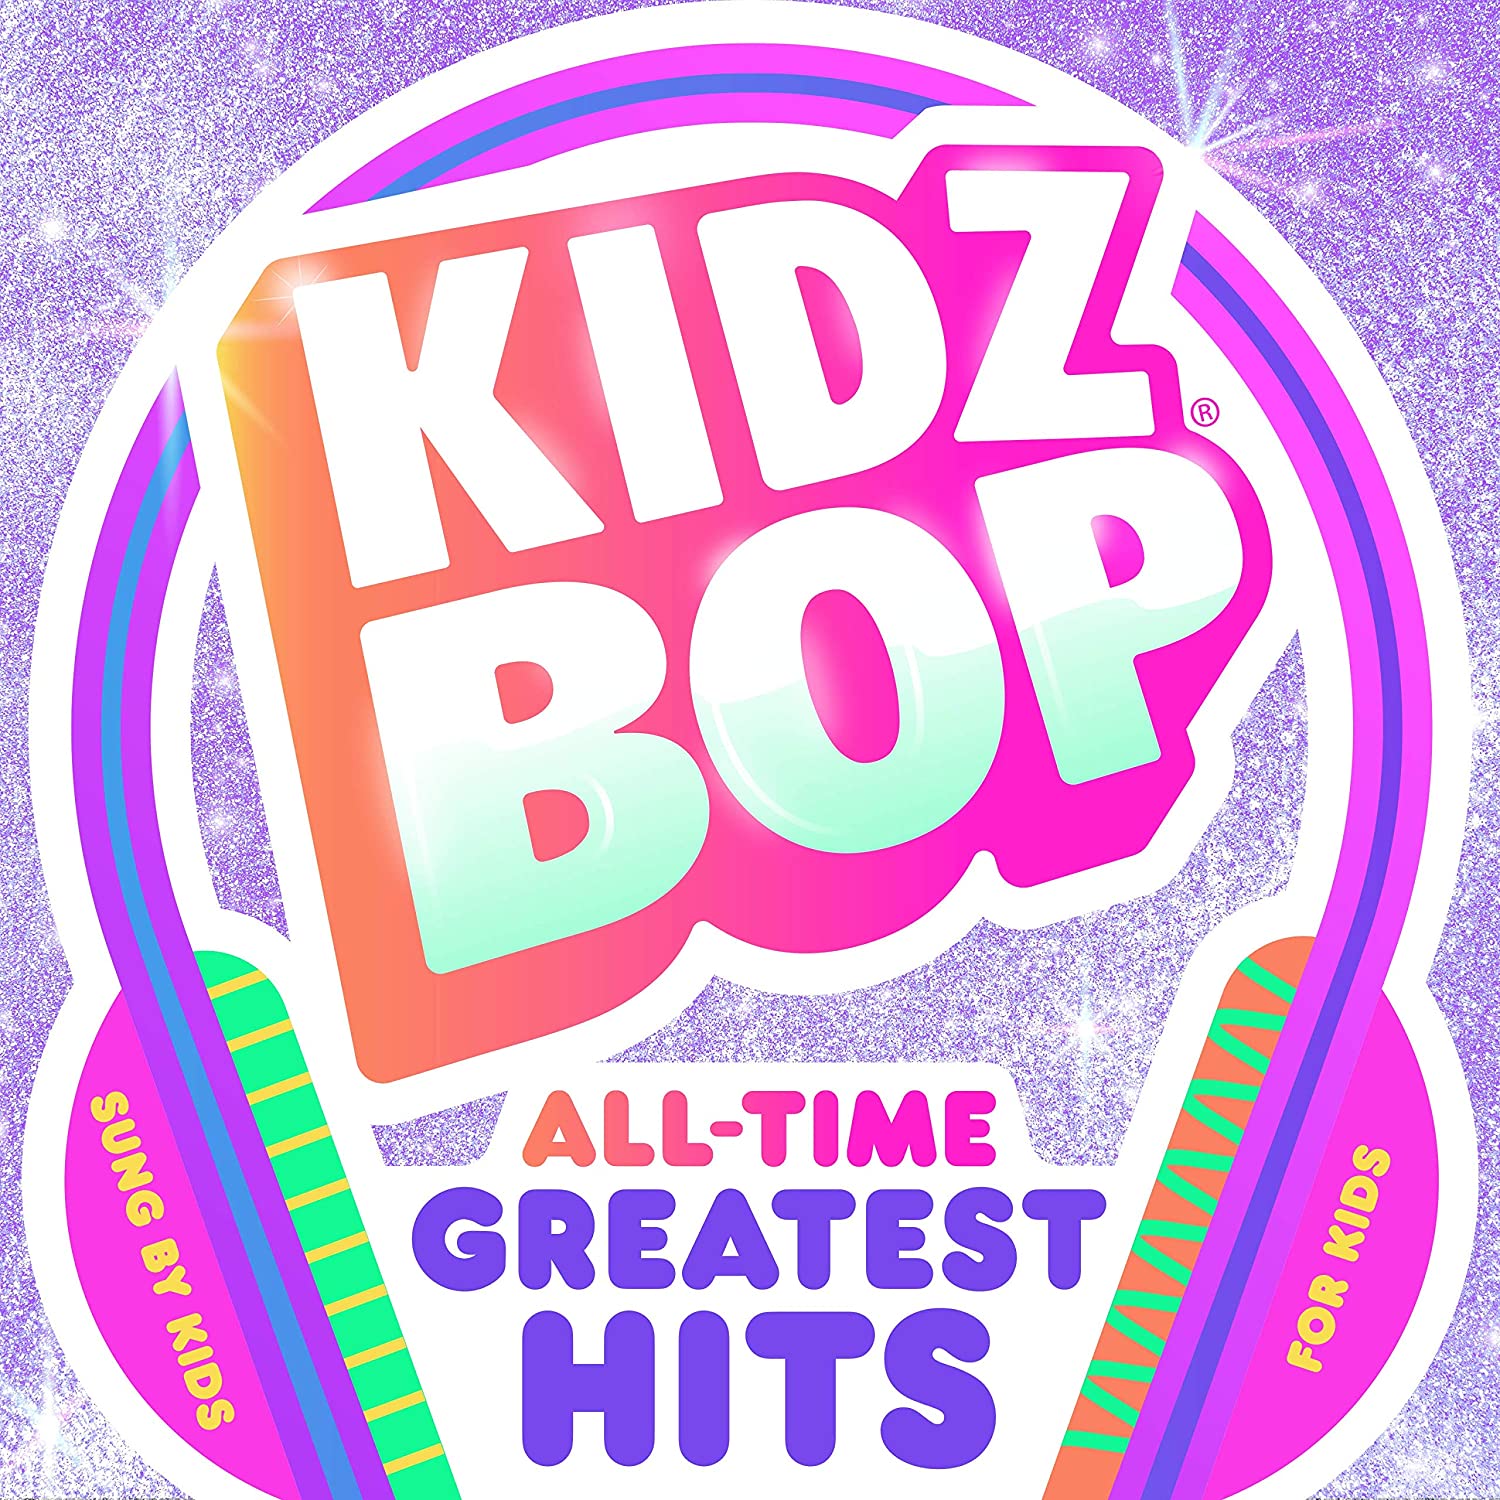 Featured image for “KIDZ BOP All-Time Greatest Hits”